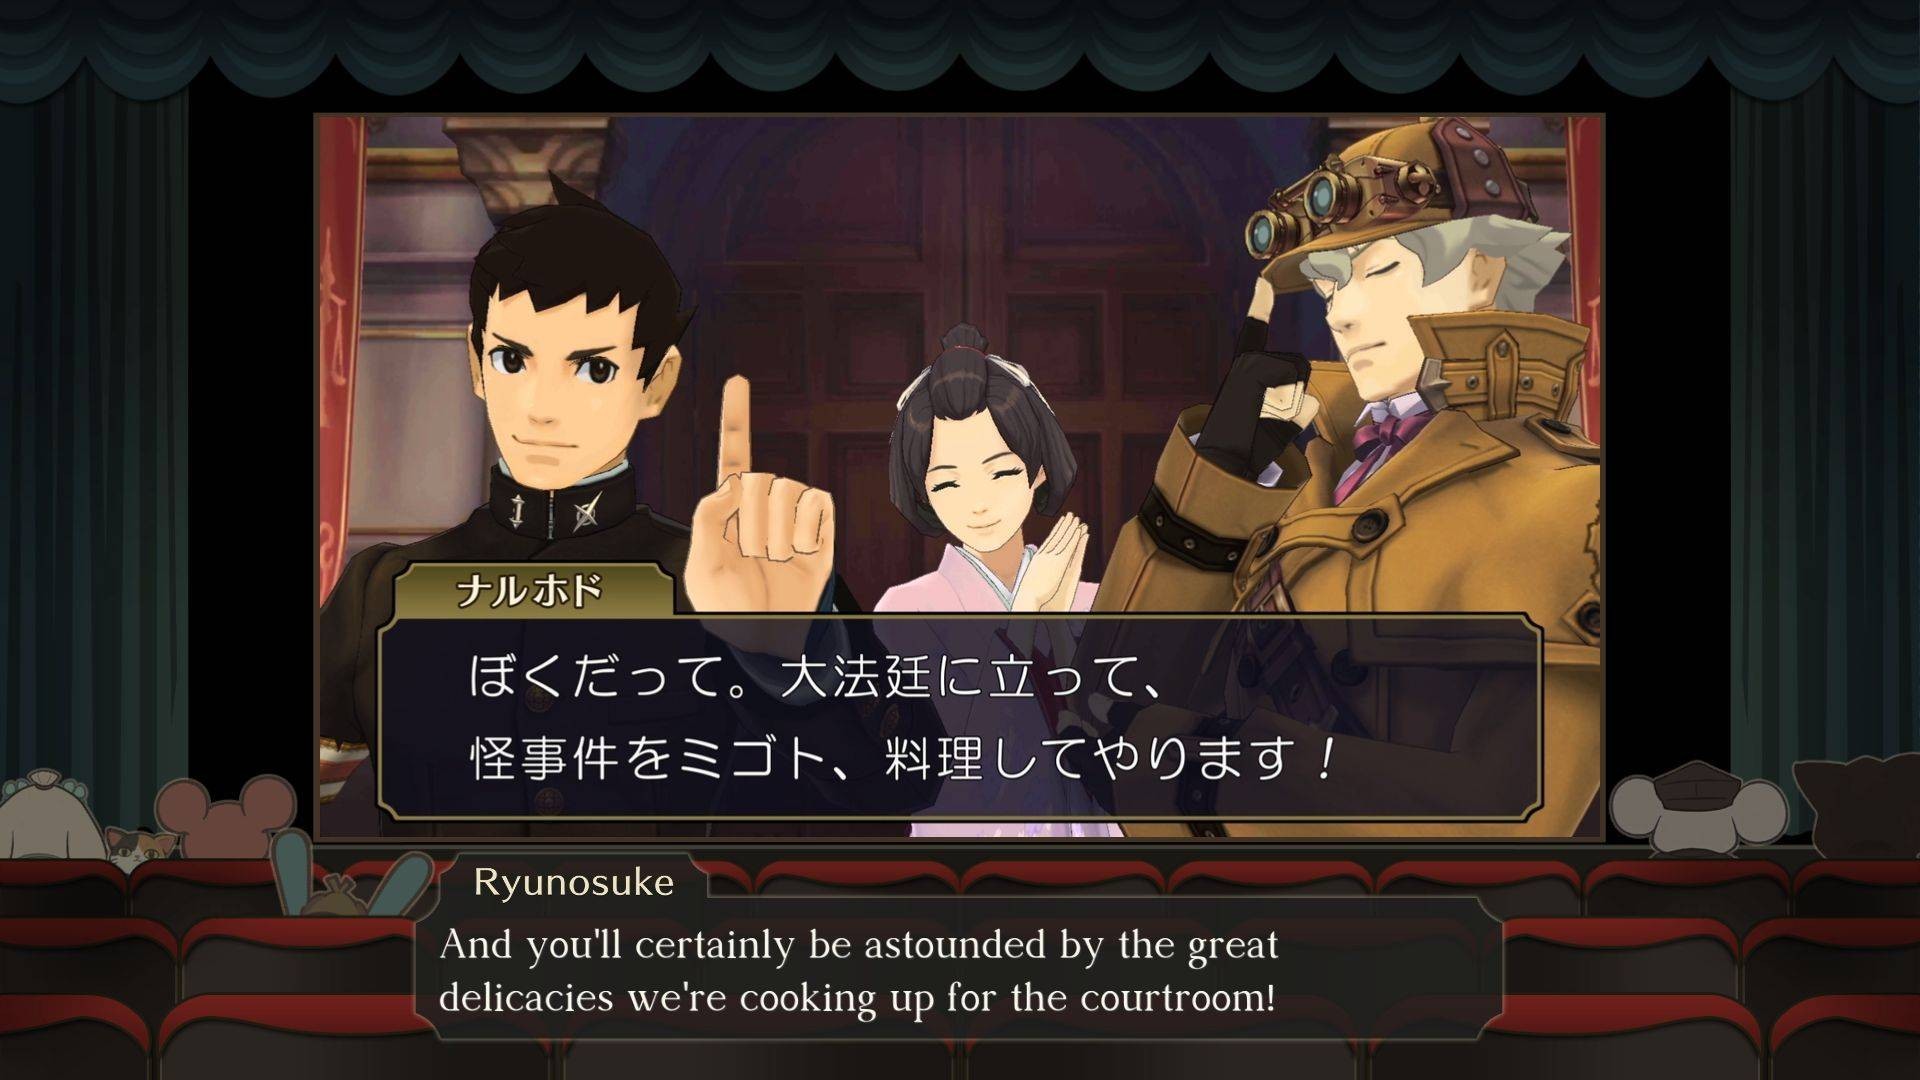 The Great Ace Attorney Chronicles Steam Key for PC - Buy now